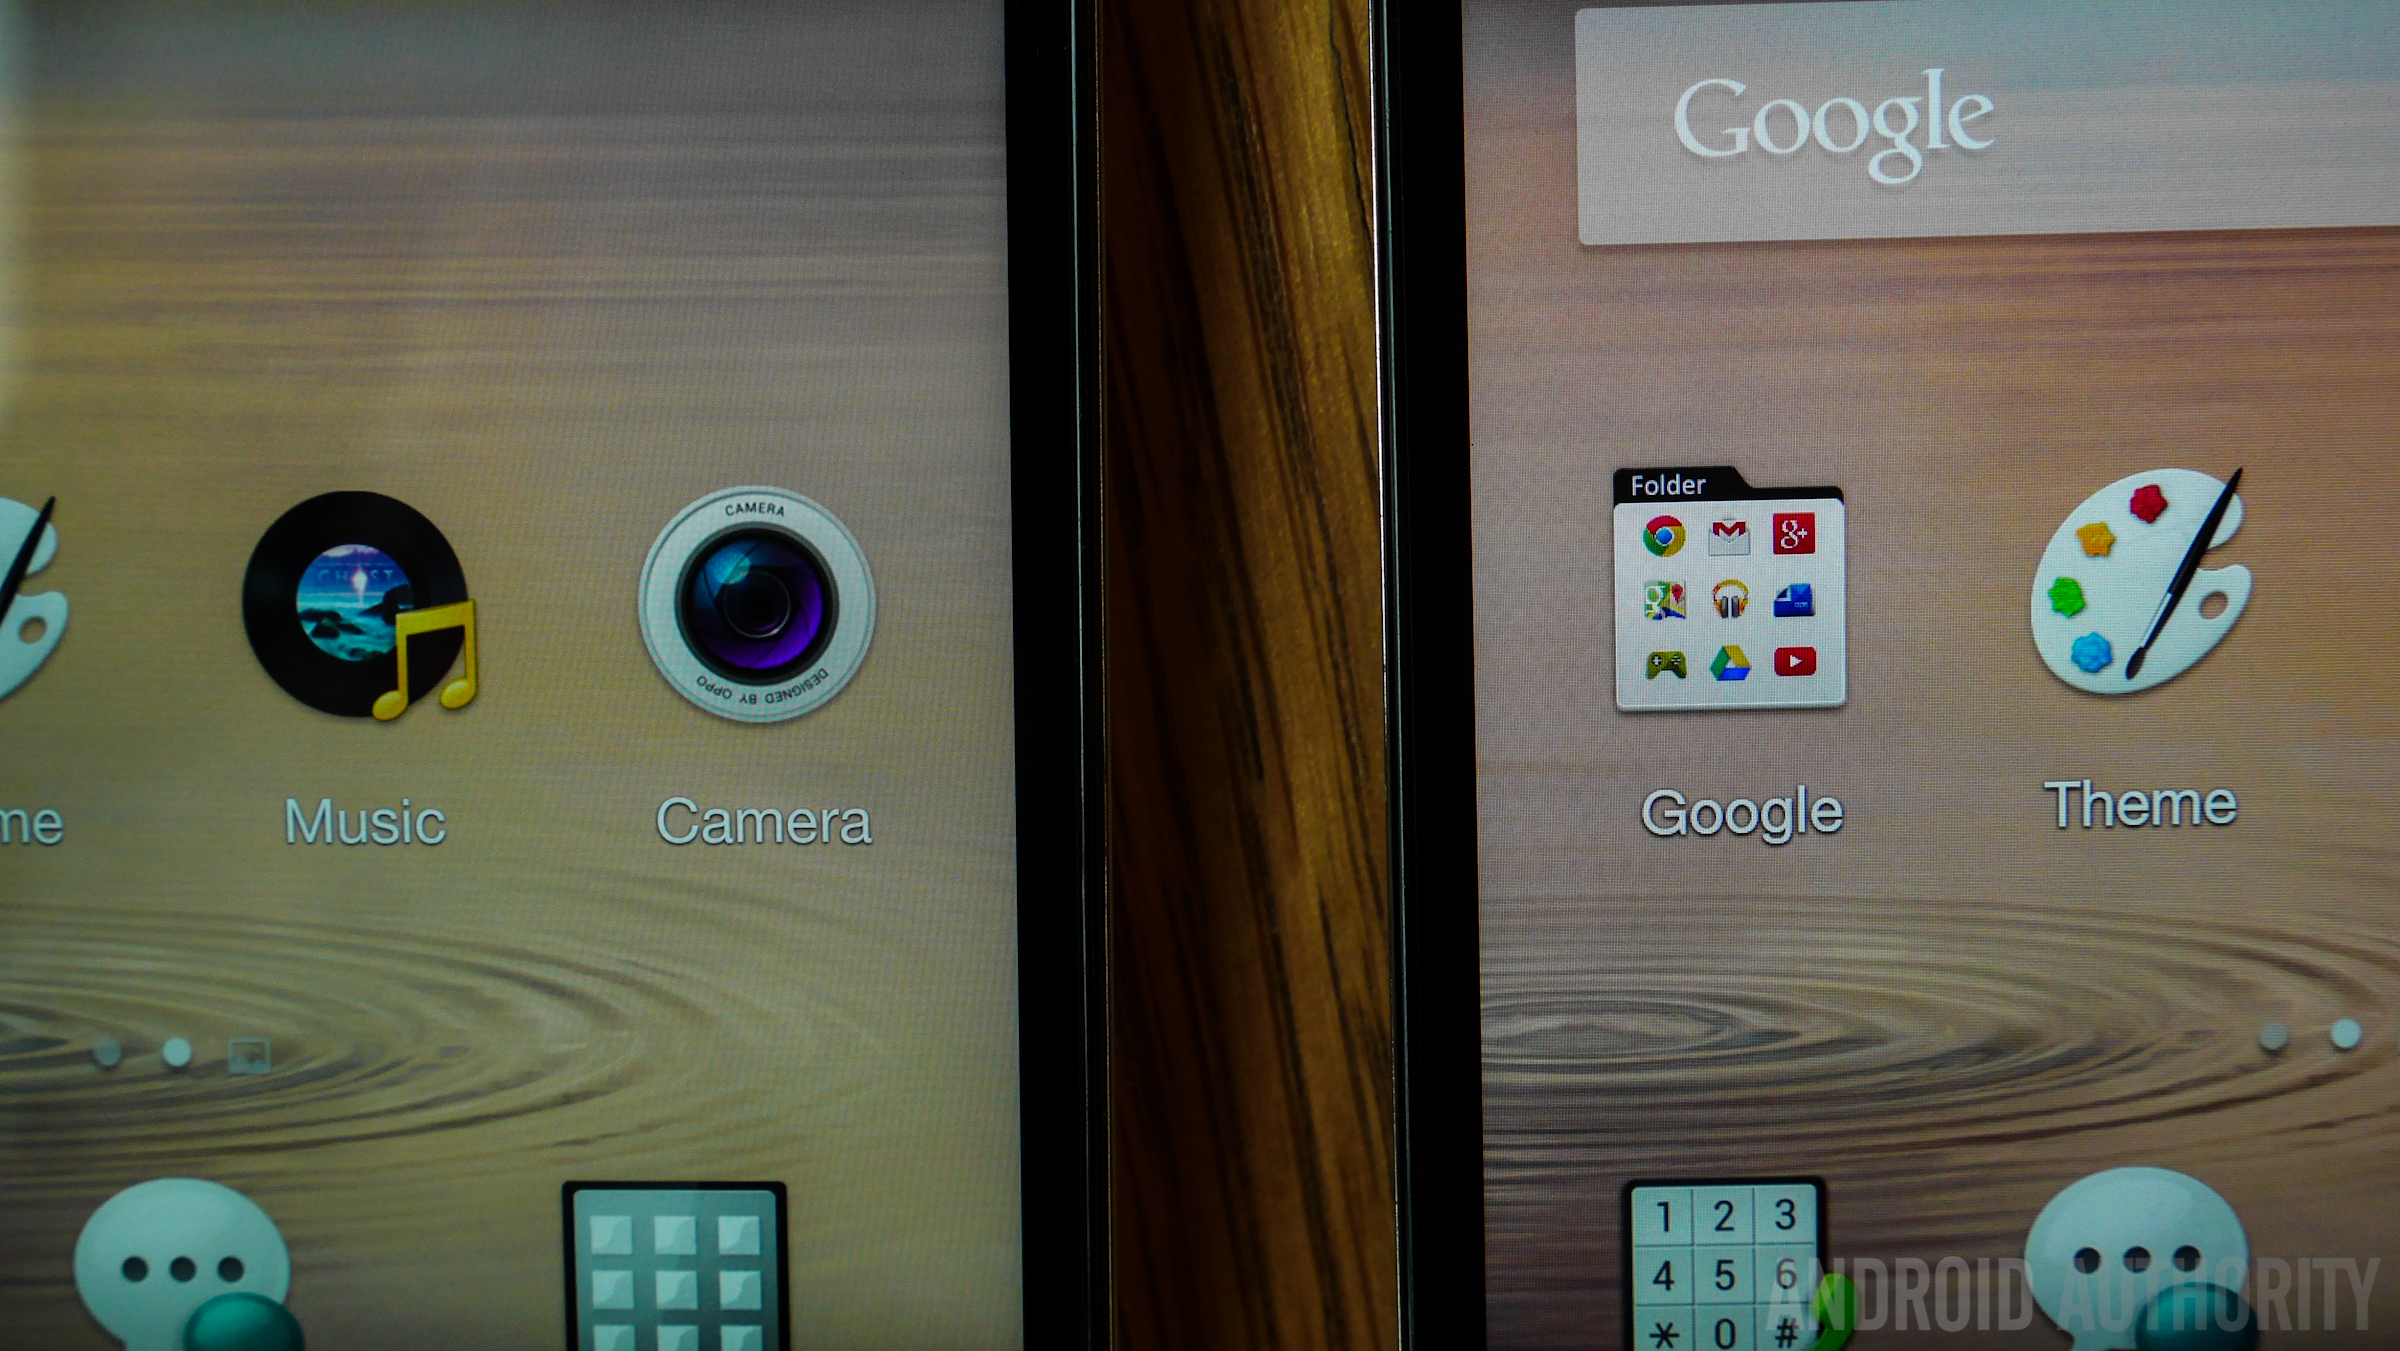 Pixels are more visible on the display of the Full HD Find 7 Standard (right), compared to the Quad HD premium version